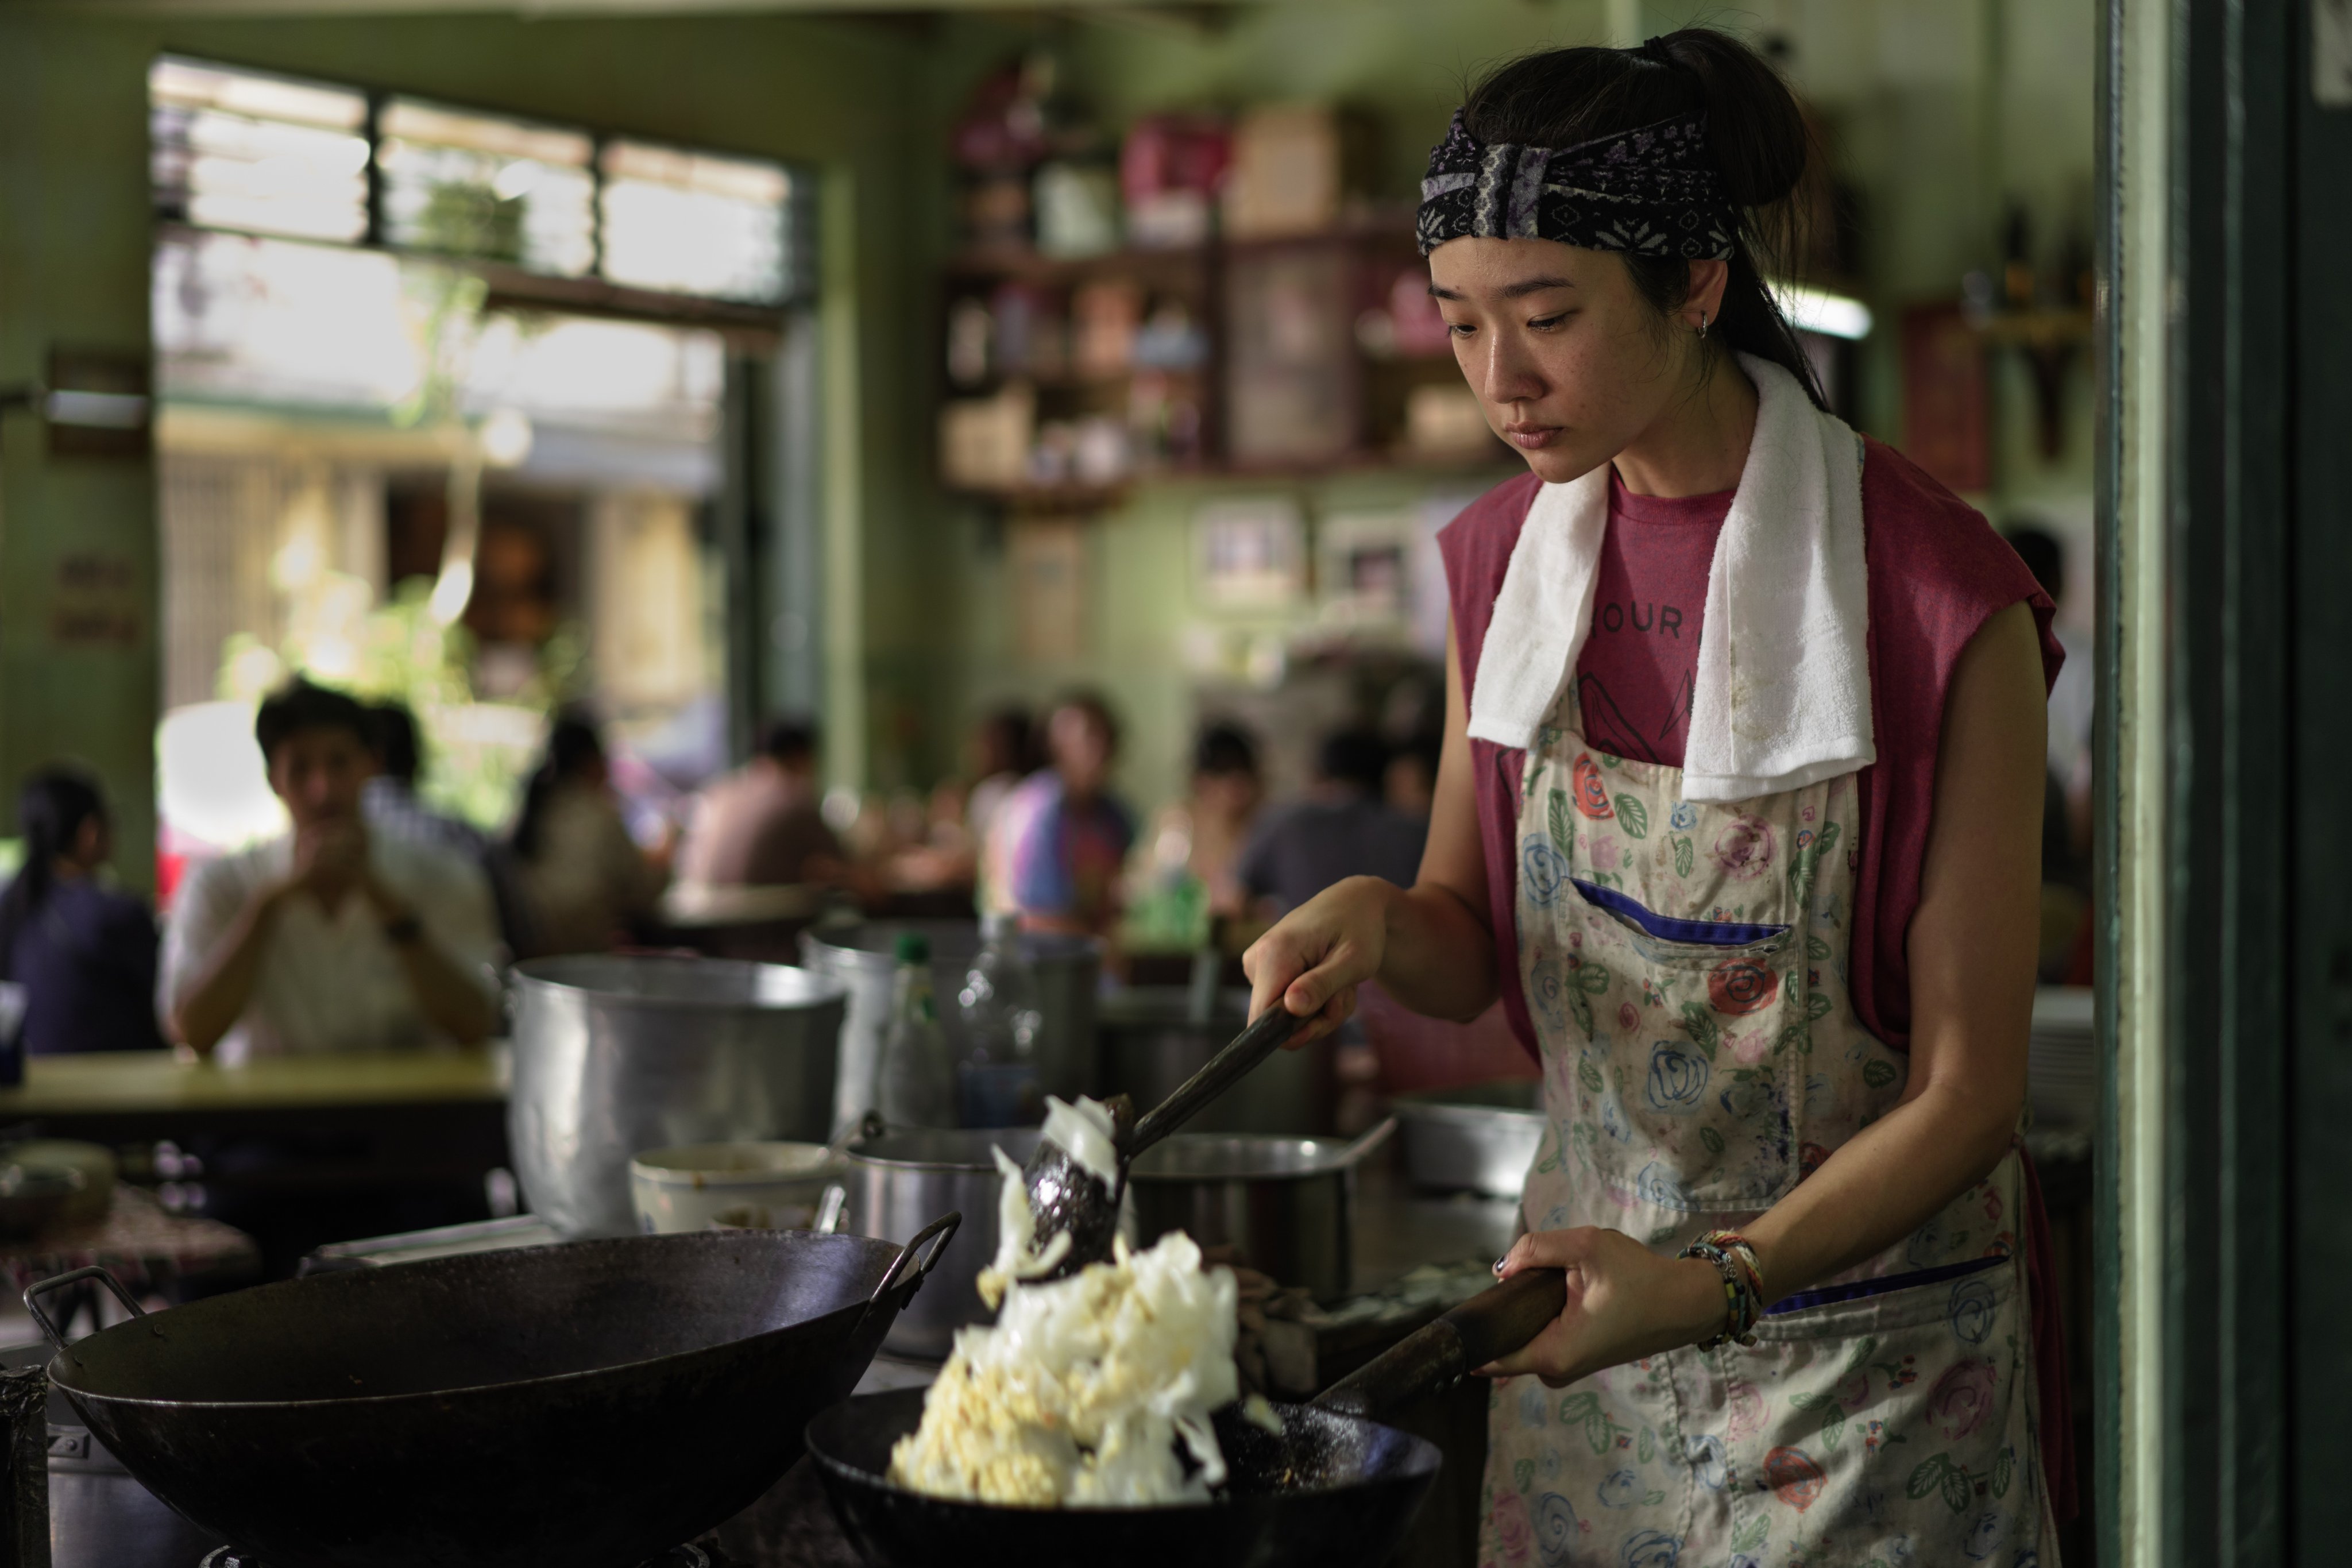 Chutimon Chuengcharoensukying as Bangkok noodle cook Aoy in a still from Hunger. The Netflix drama uses haute cuisine to comment on inequality and the human hunger for success. Photo: Netflix